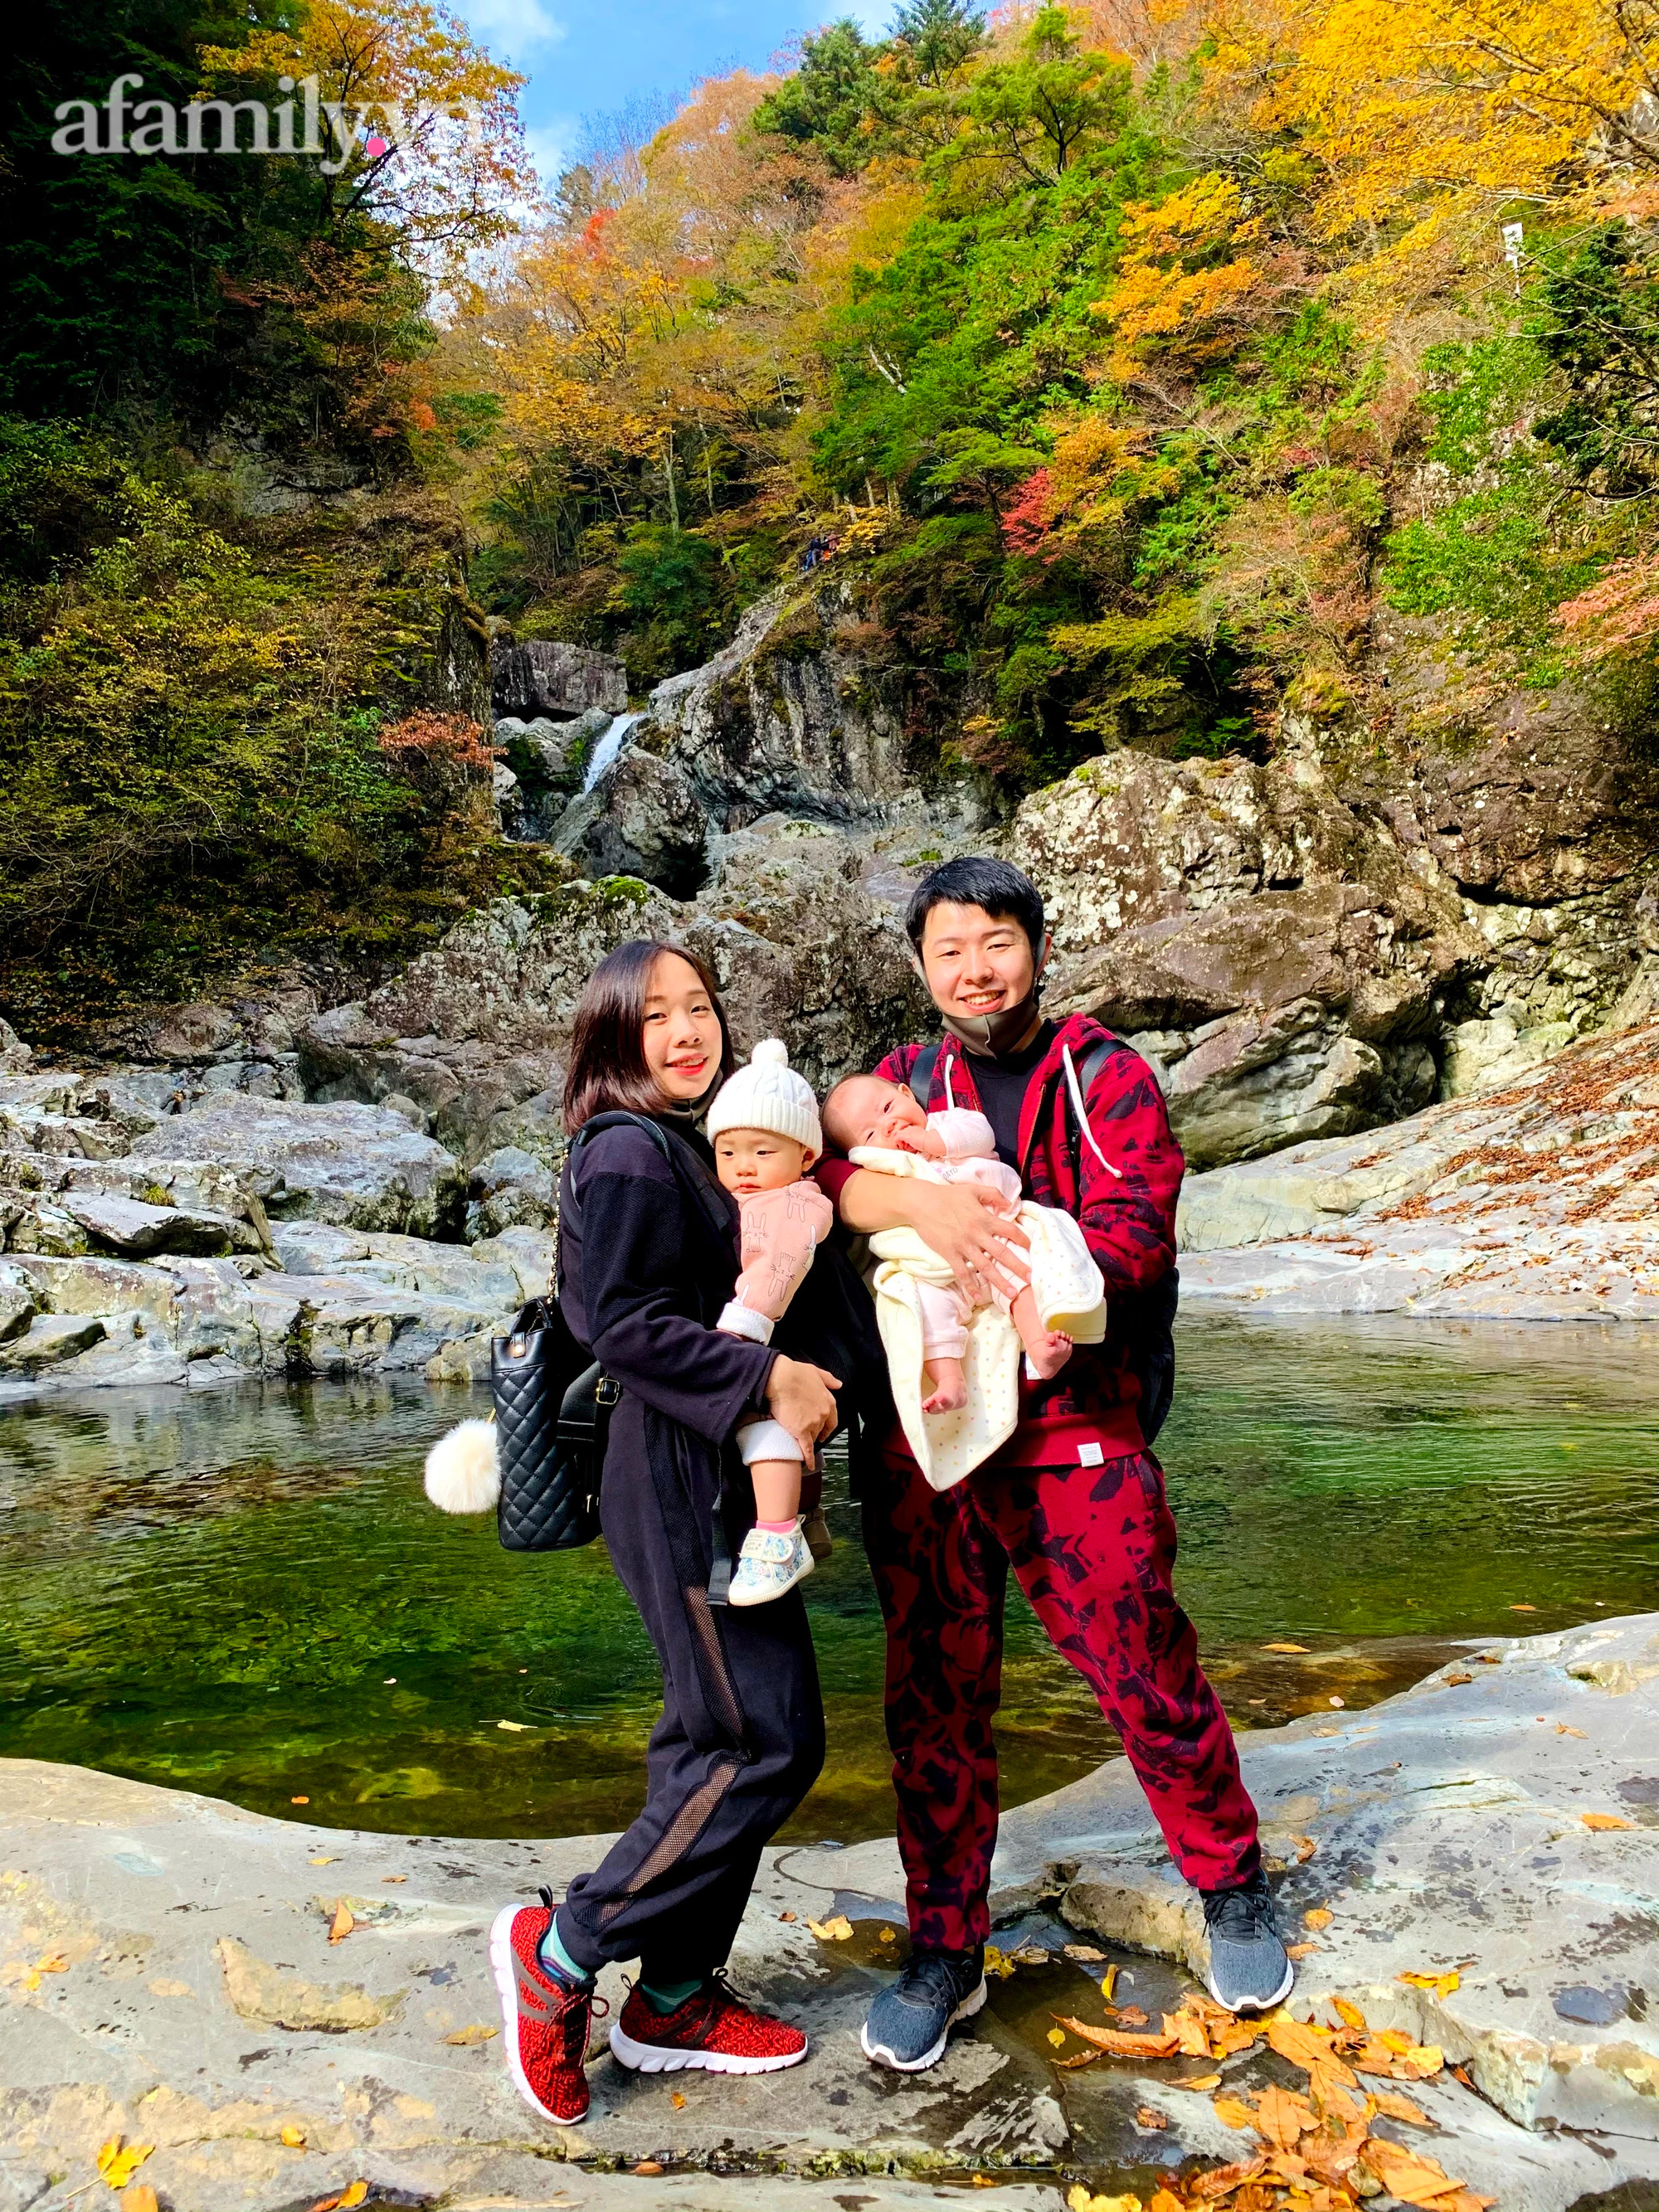 The experience of a hot YouTuber who is a full-time mother in Japan, choosing to quit her job to wholeheartedly care for and raise her 2 daughters - Photo 3.